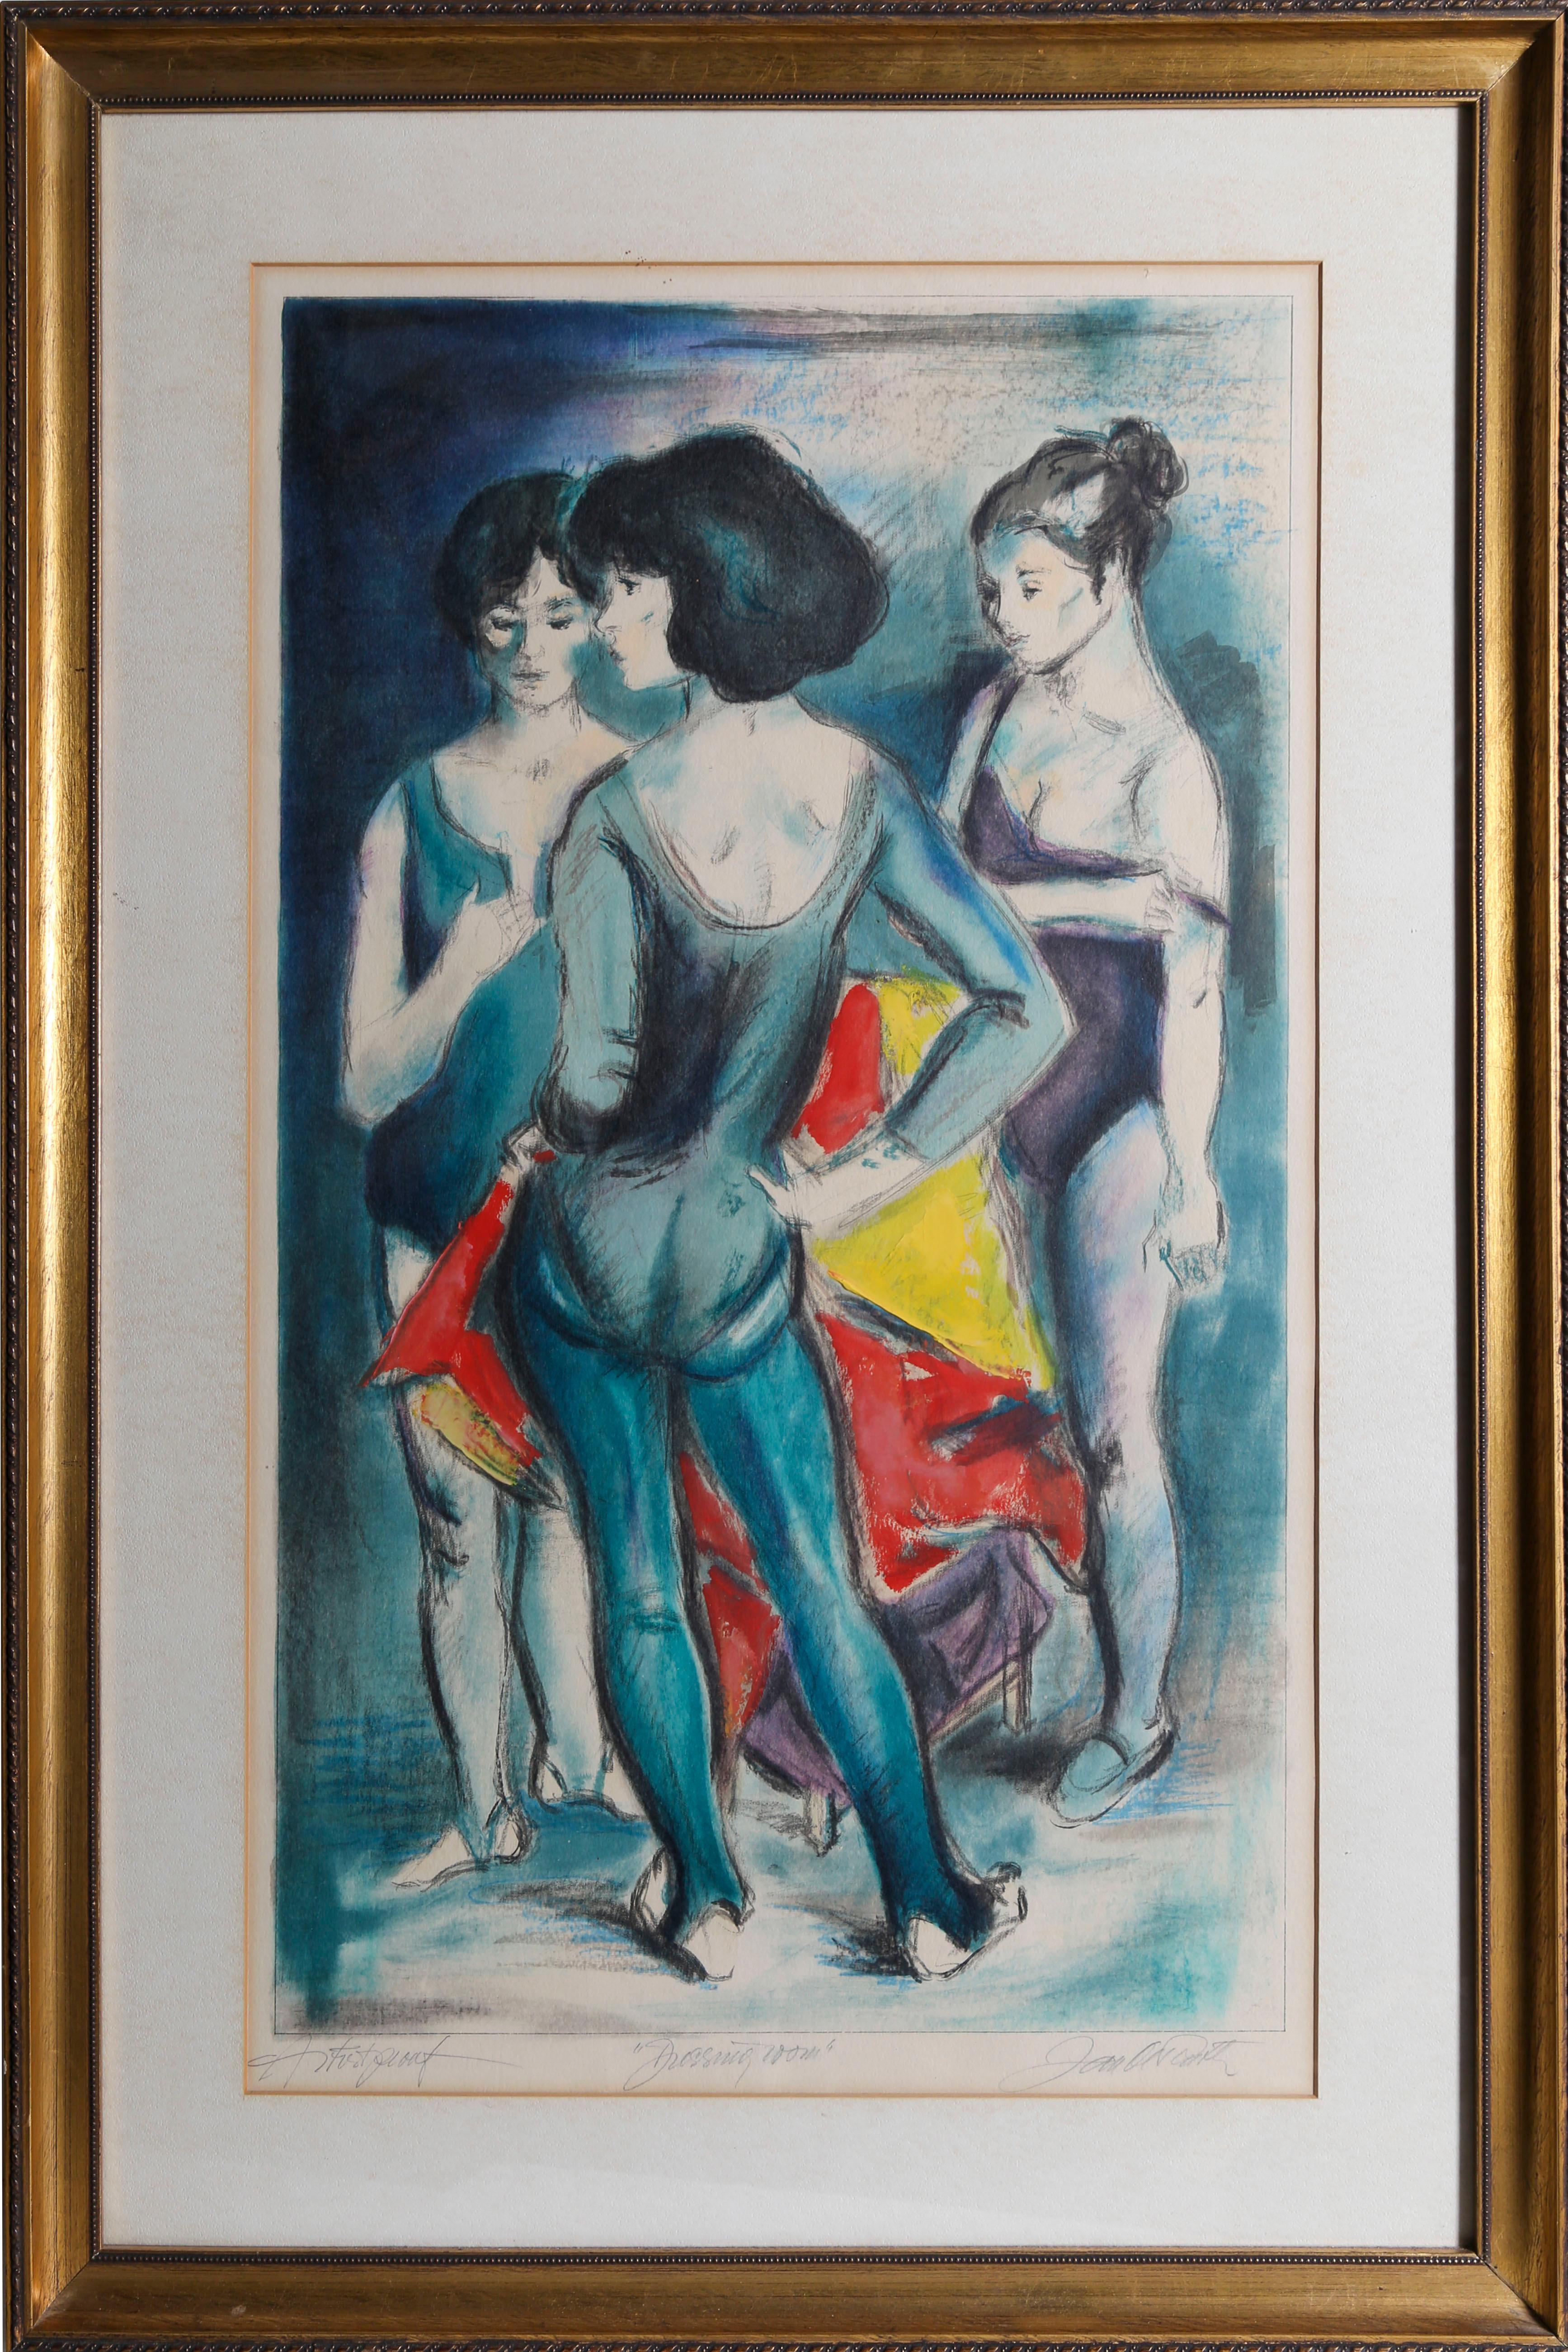 Standing in a circle, the three women in this print by Jan De Ruth wear leotards with tights as they try on costumes in a dressing room. Showing the behind-the-scenes action of a dance studio, this work demonstrates the artist's dexterity in